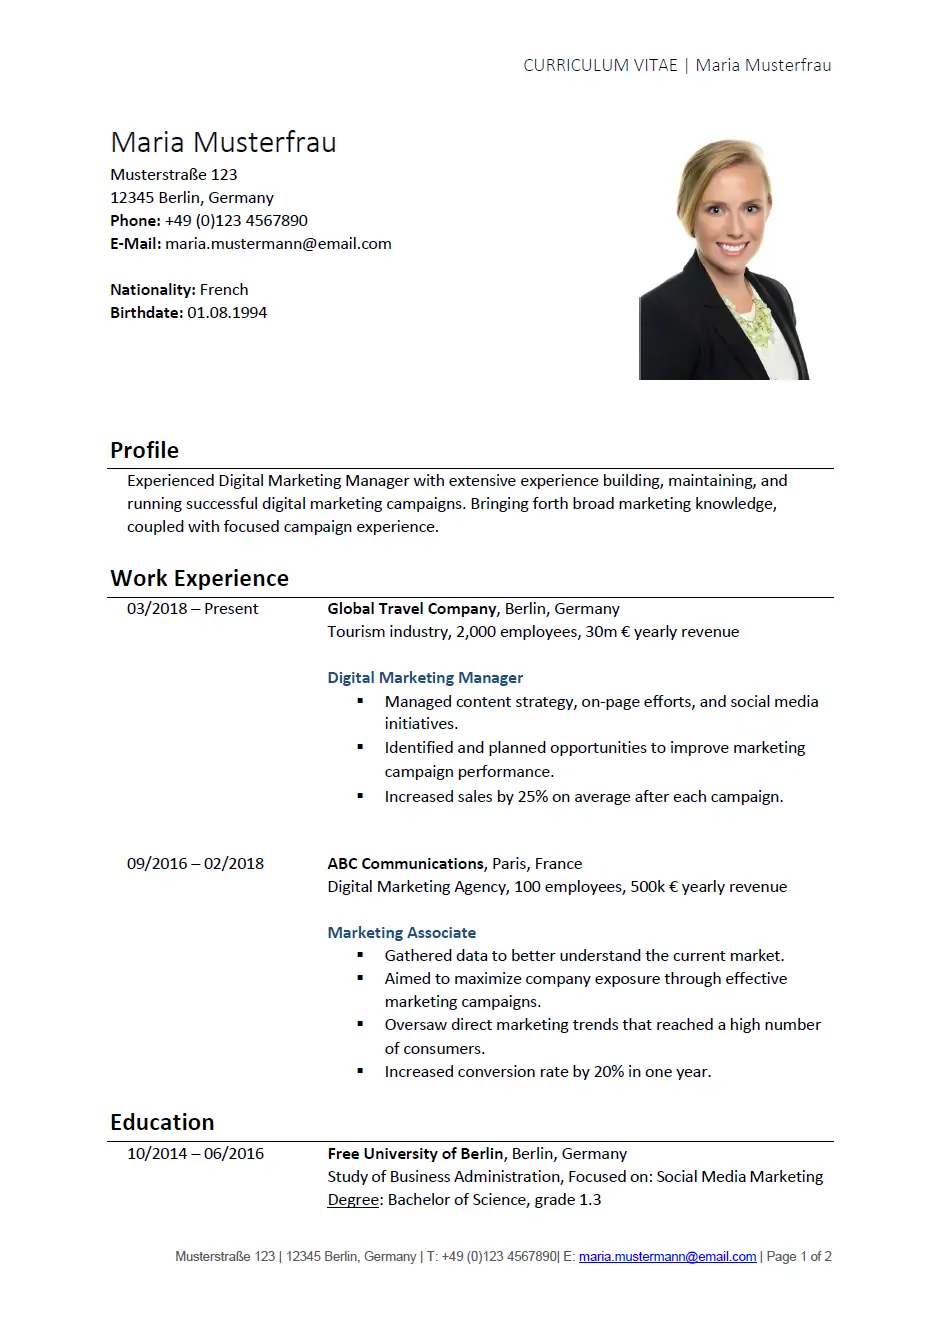 Maria Mustermann_CV template image_page 1_how to write CV in Germany English template_my life in germany_hkwomanabroad